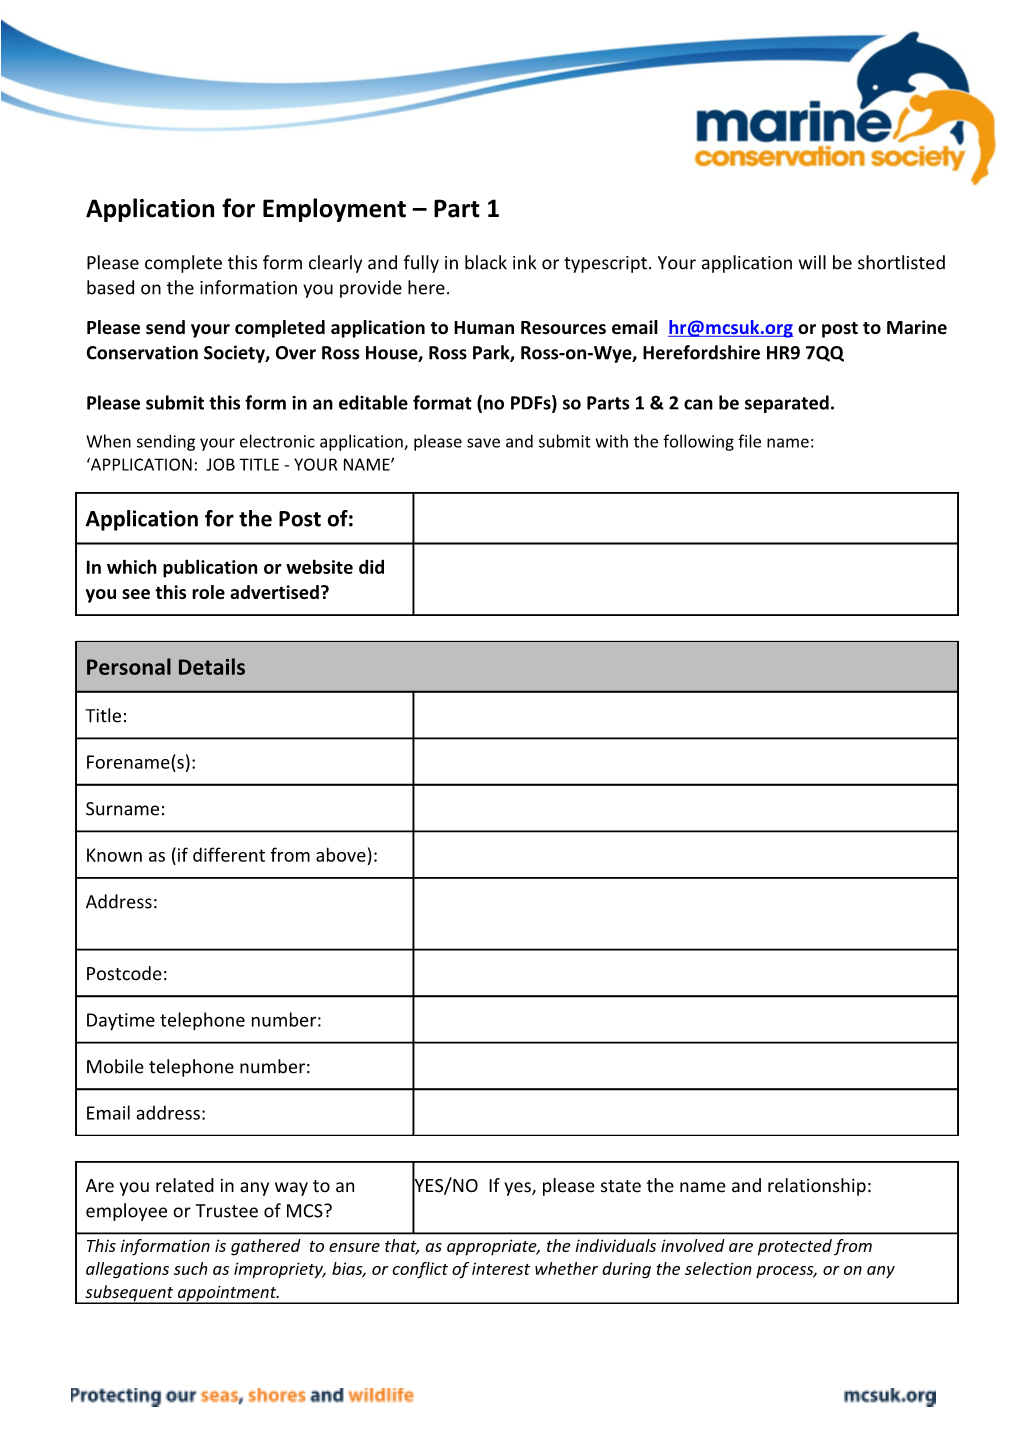 Please Submit This Form in an Editable Format (No Pdfs) So Parts 1 & 2 Can Be Separated